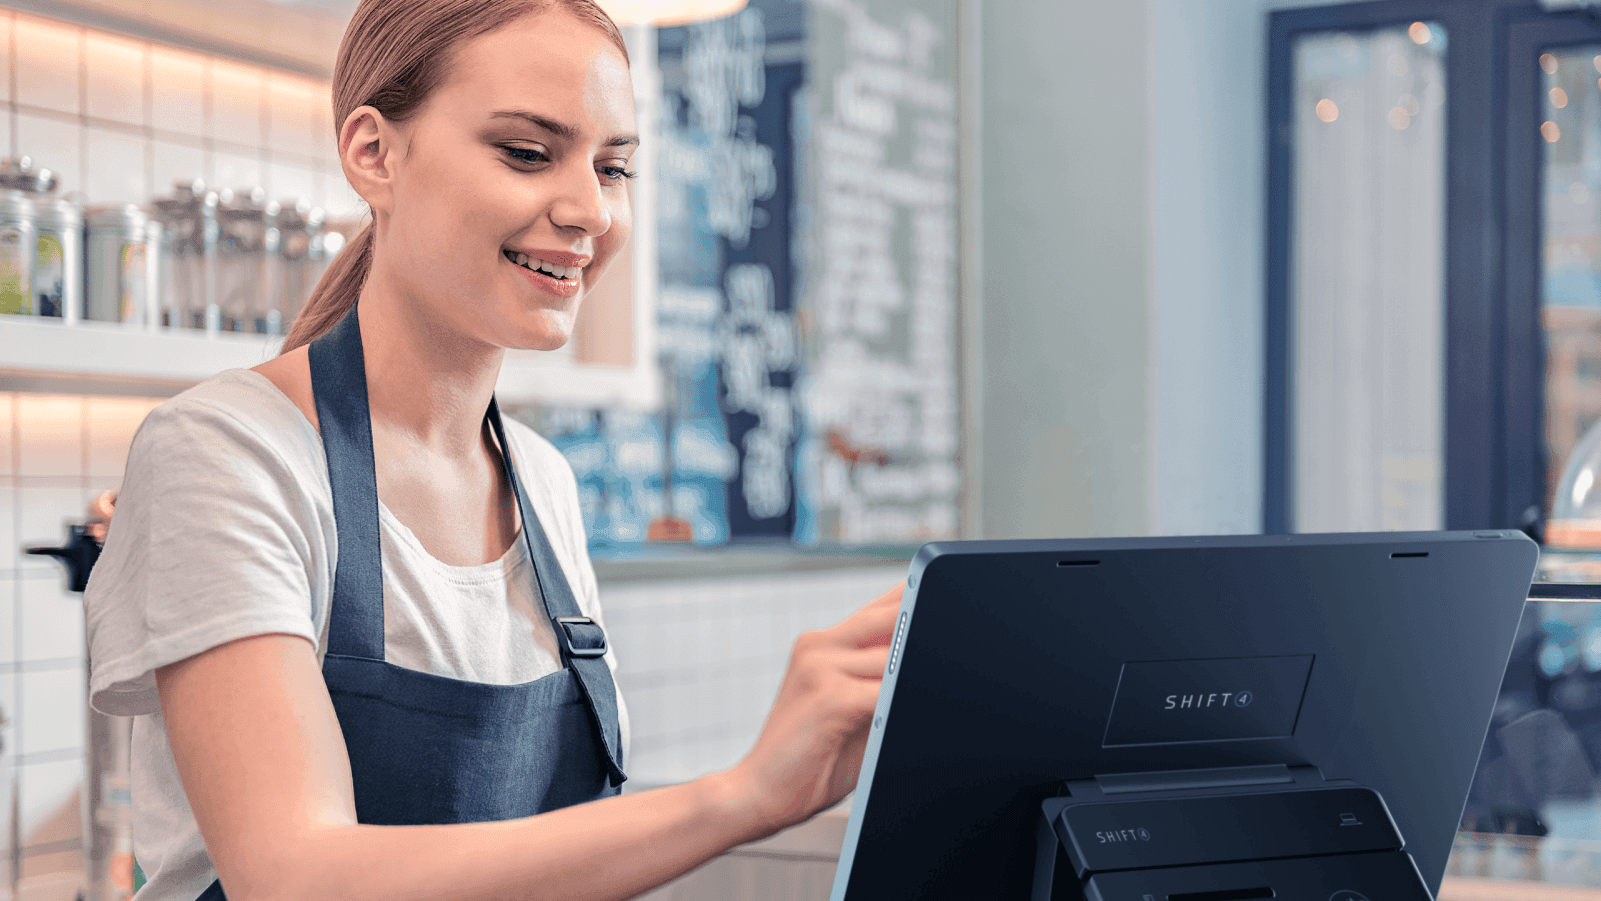 restaurant operations_employee using a POS system_Shift4.png